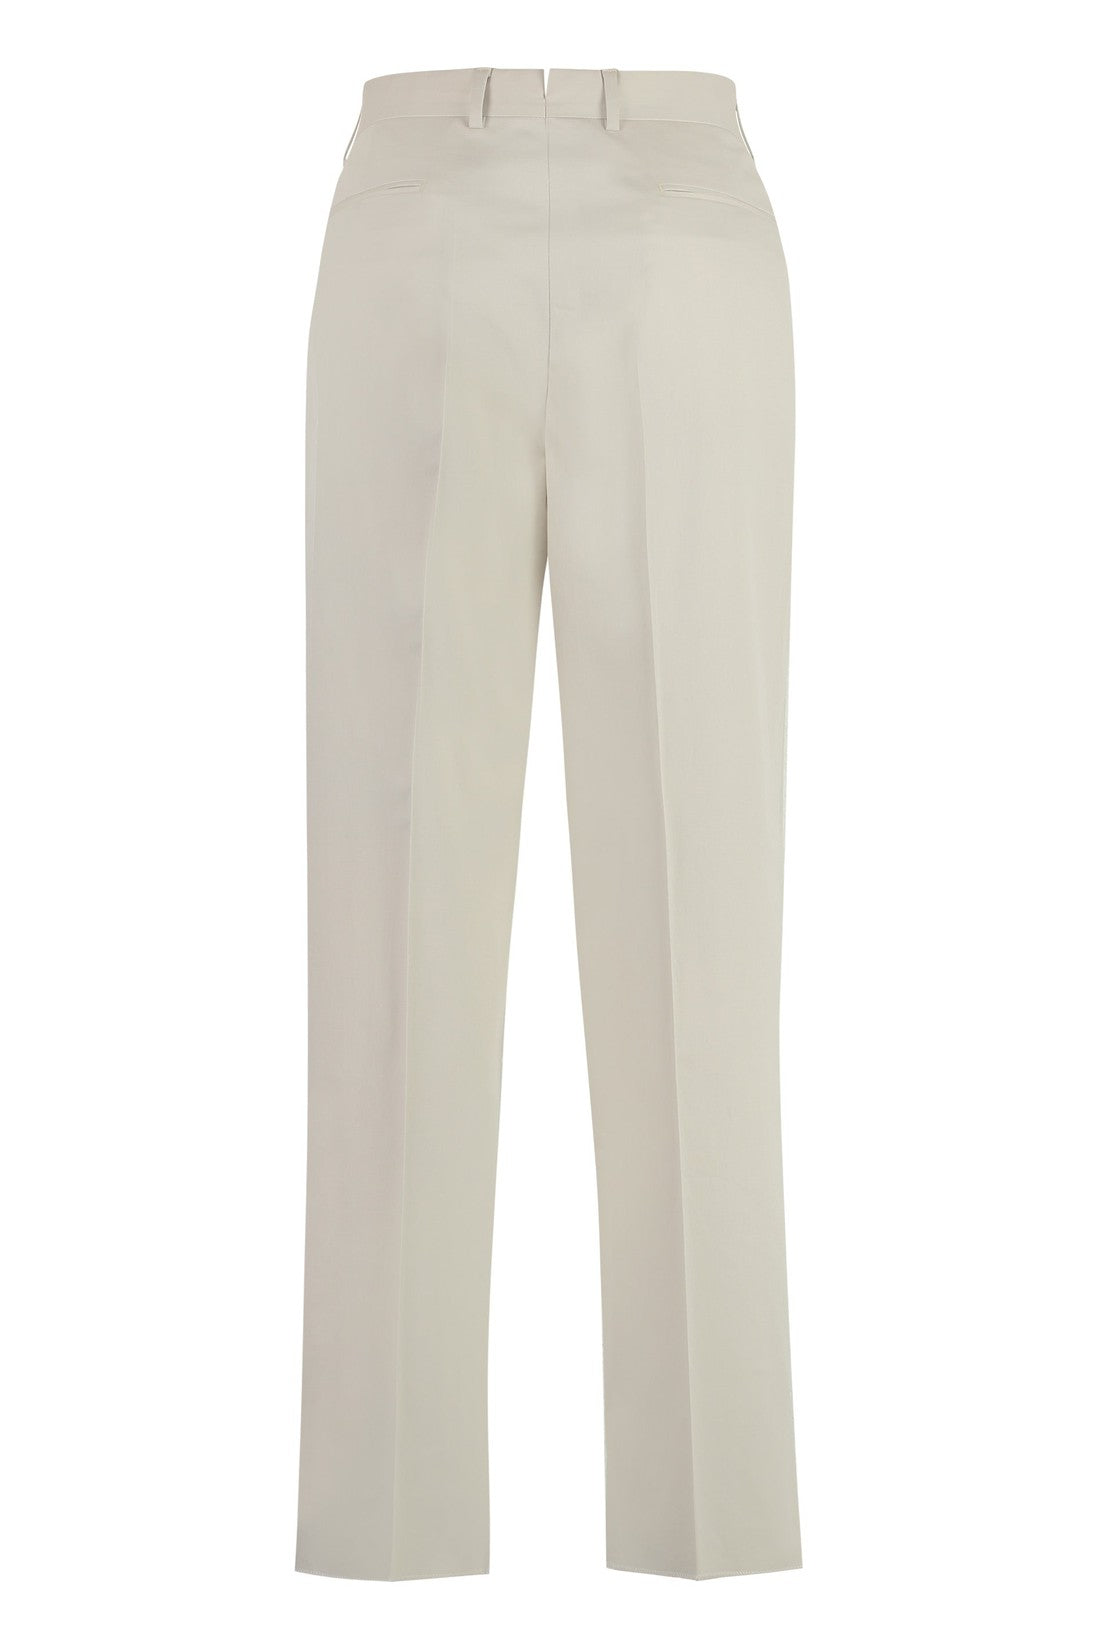 Zegna-OUTLET-SALE-Stretch cotton chino trousers-ARCHIVIST